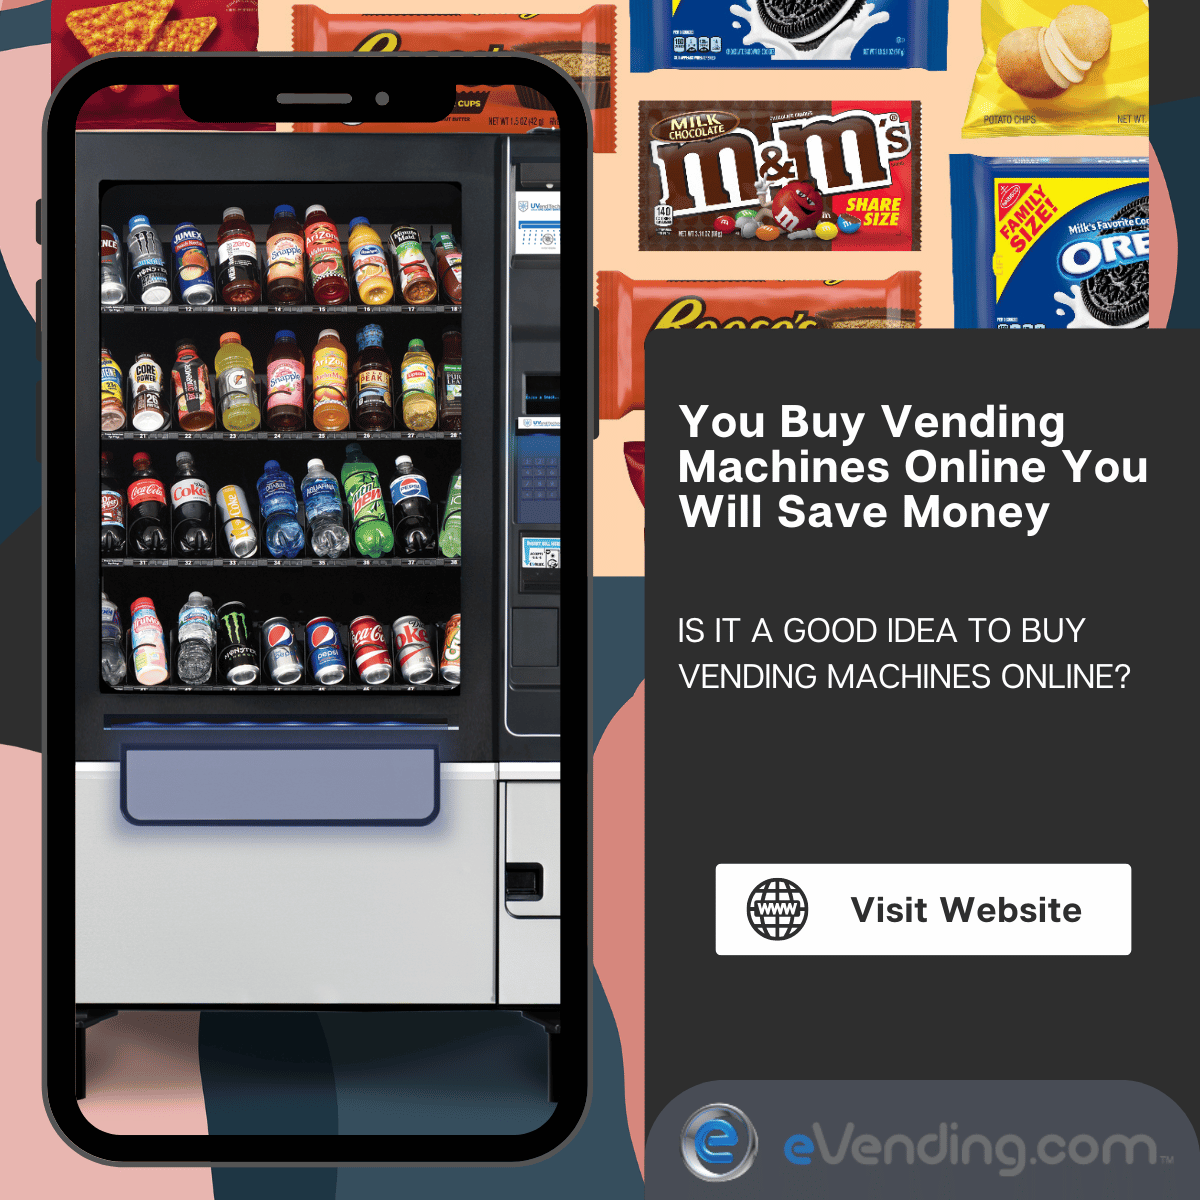 IS IT A GOOD IDEA TO BUY VENDING MACHINES ONLINE?